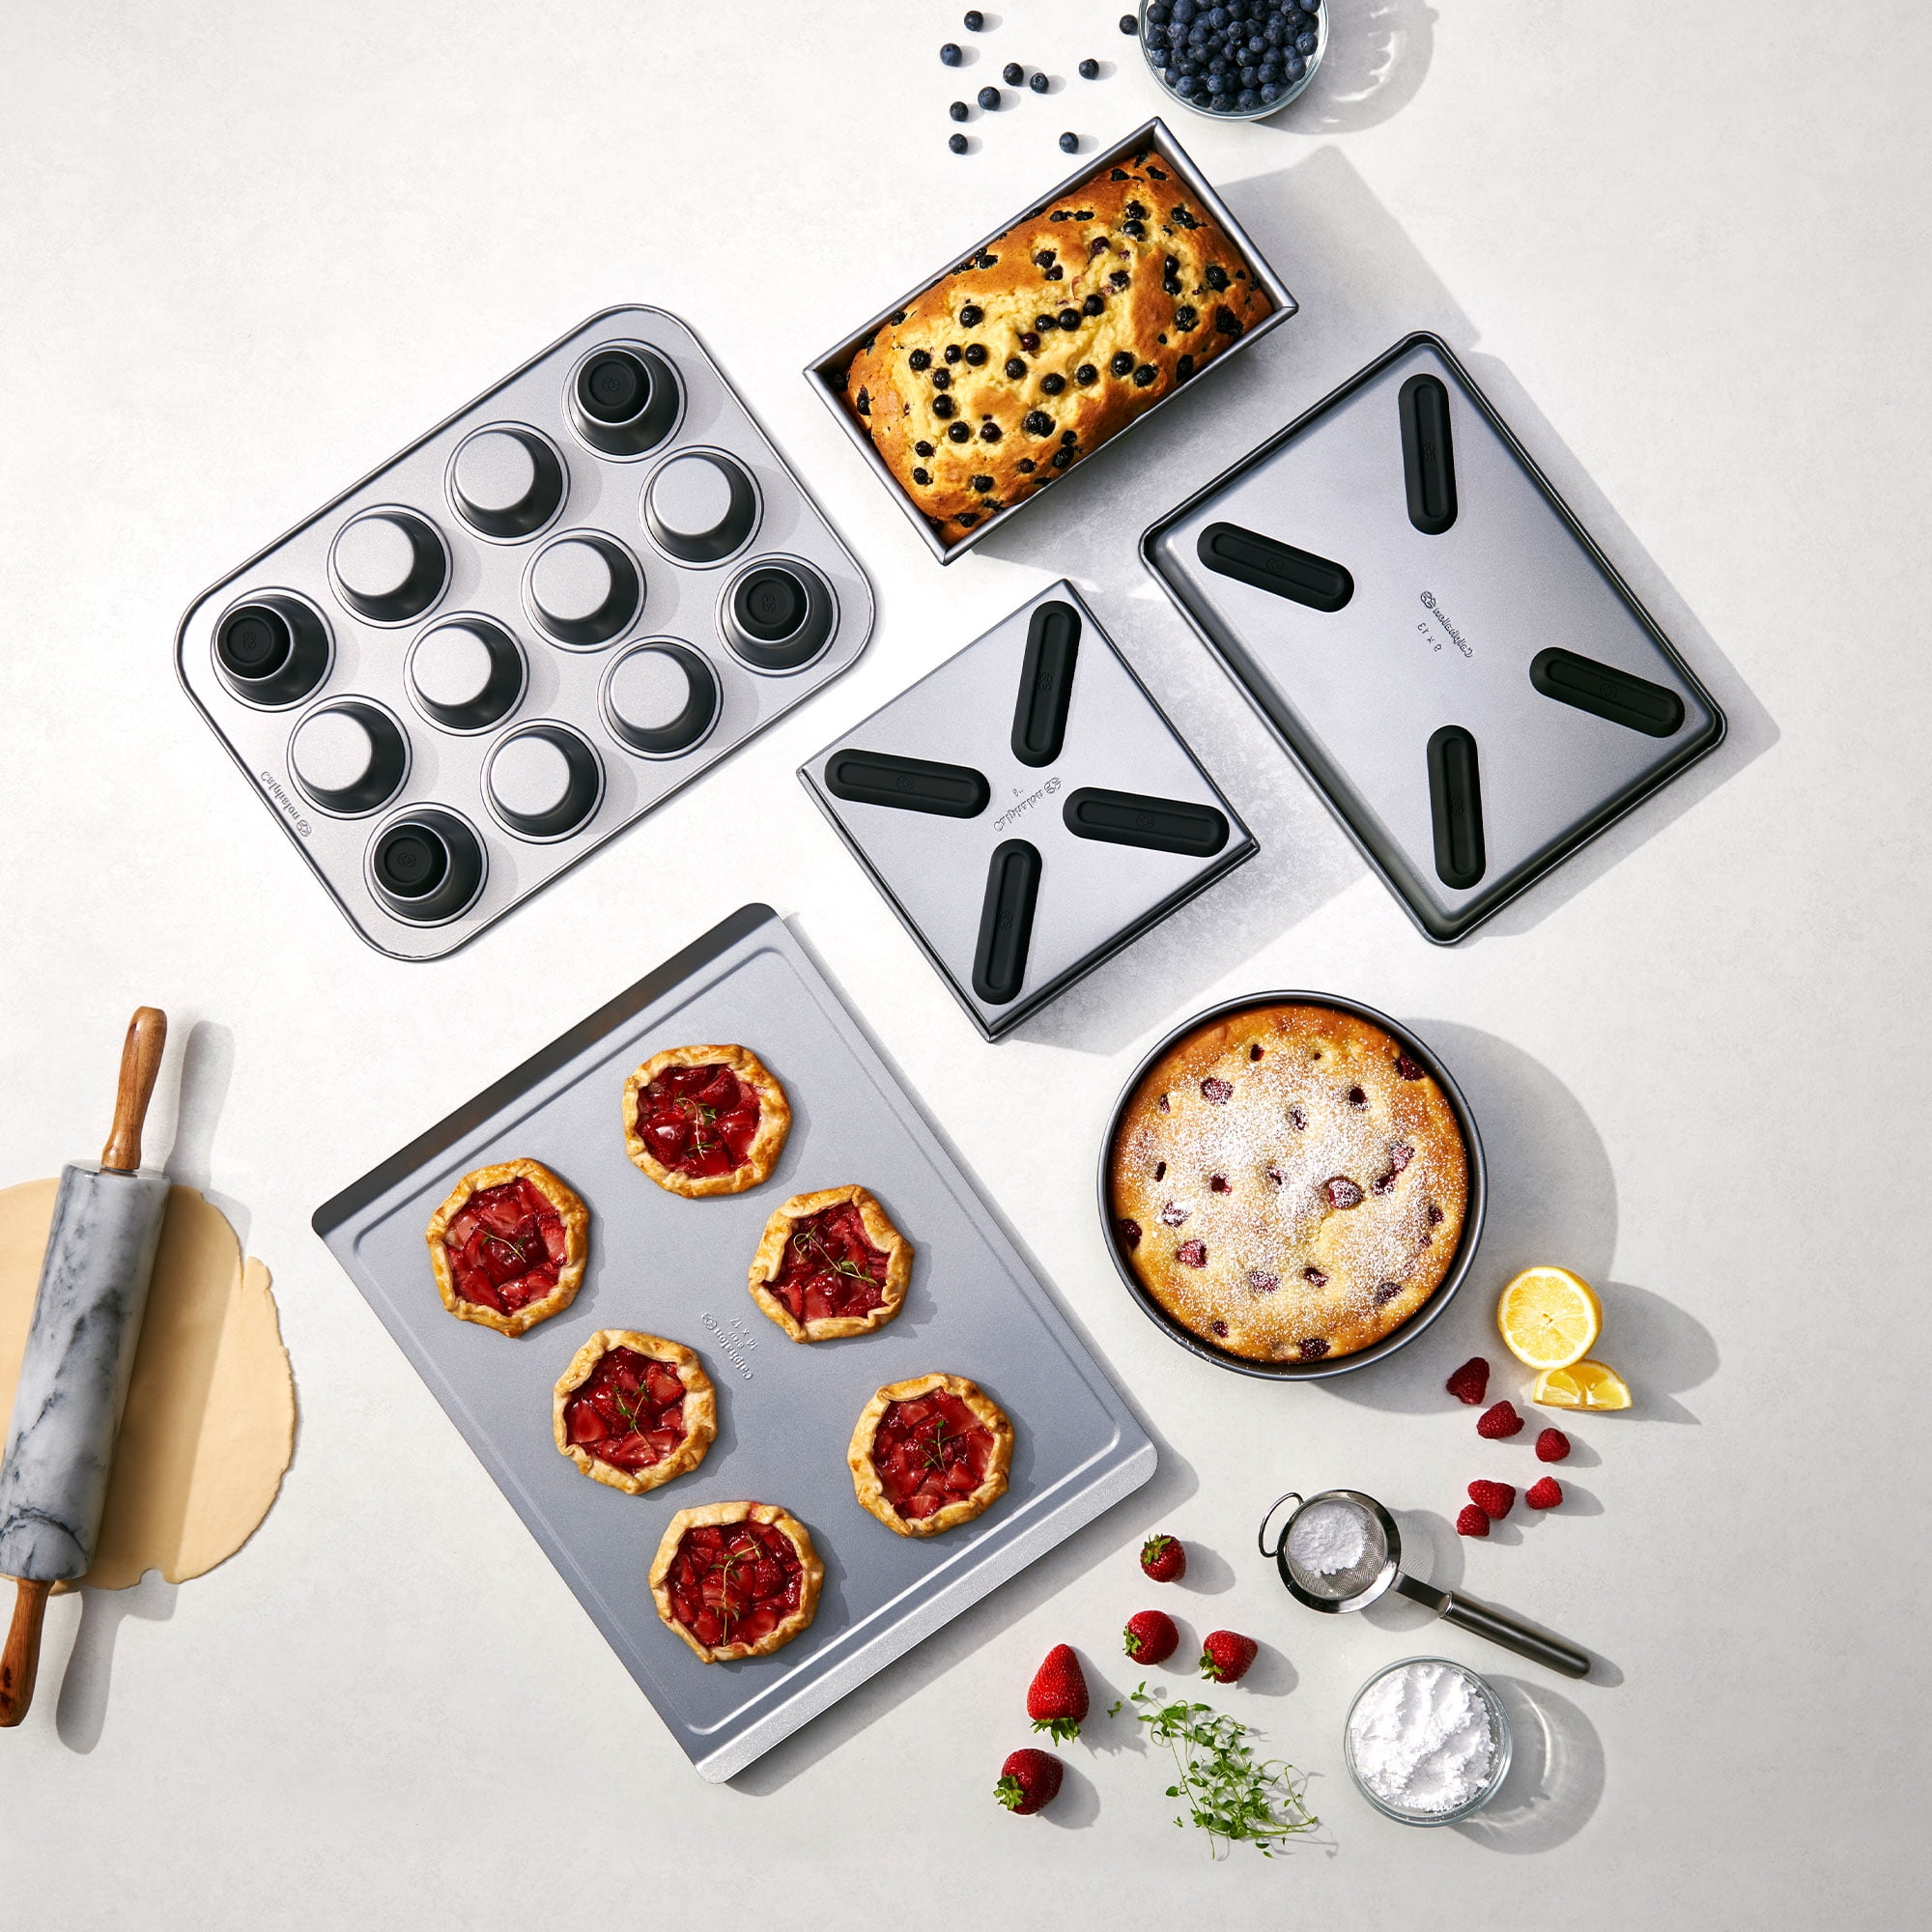 Calphalon Nonstick Bakeware Set, 10-Piece Set Includes Baking Sheet, Cookie  Sheet, Cake Pans, Silver & Pizza Pan with Holes, 16-Inch Nonstick Round